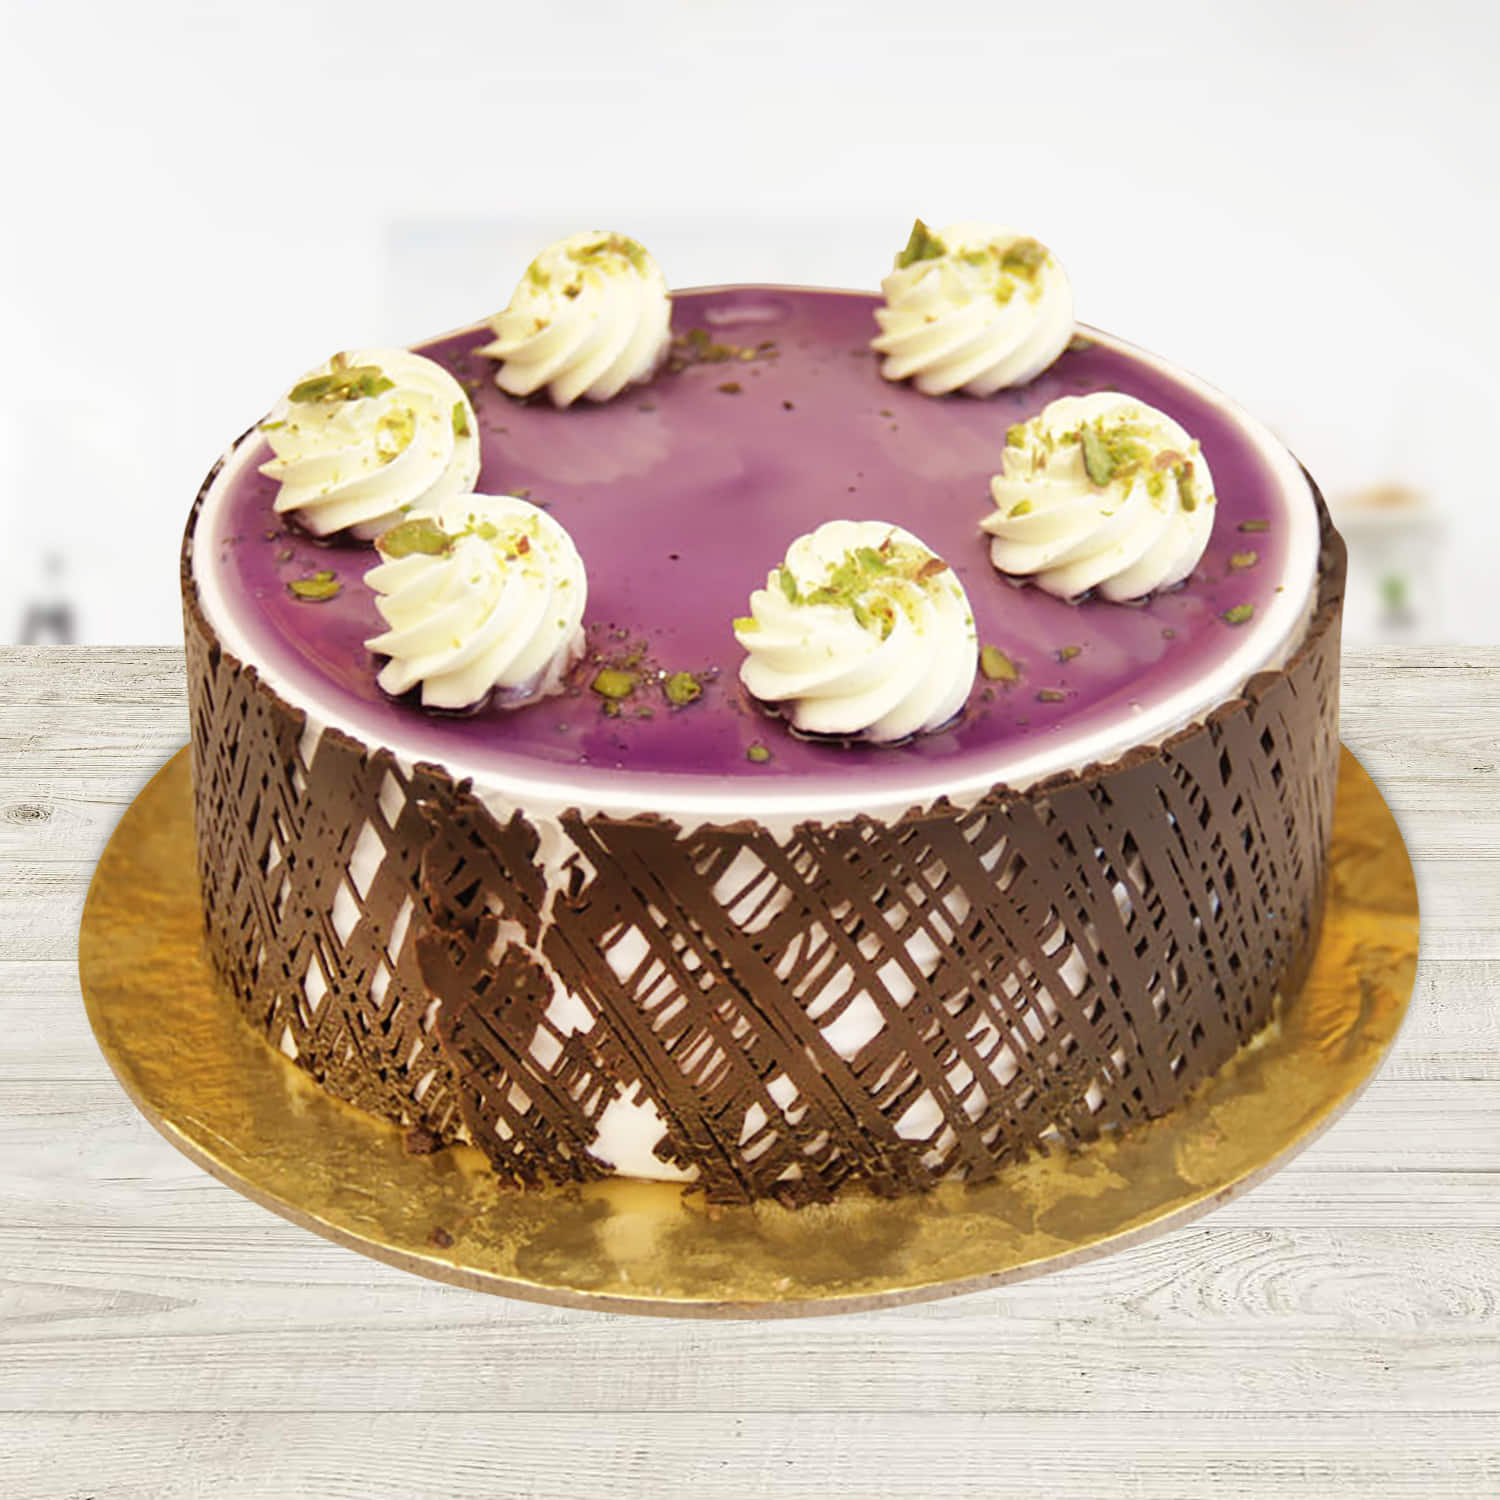 Buy Blueberry Cake Online | Order Fresh Blueberry Cake | Free Delivery